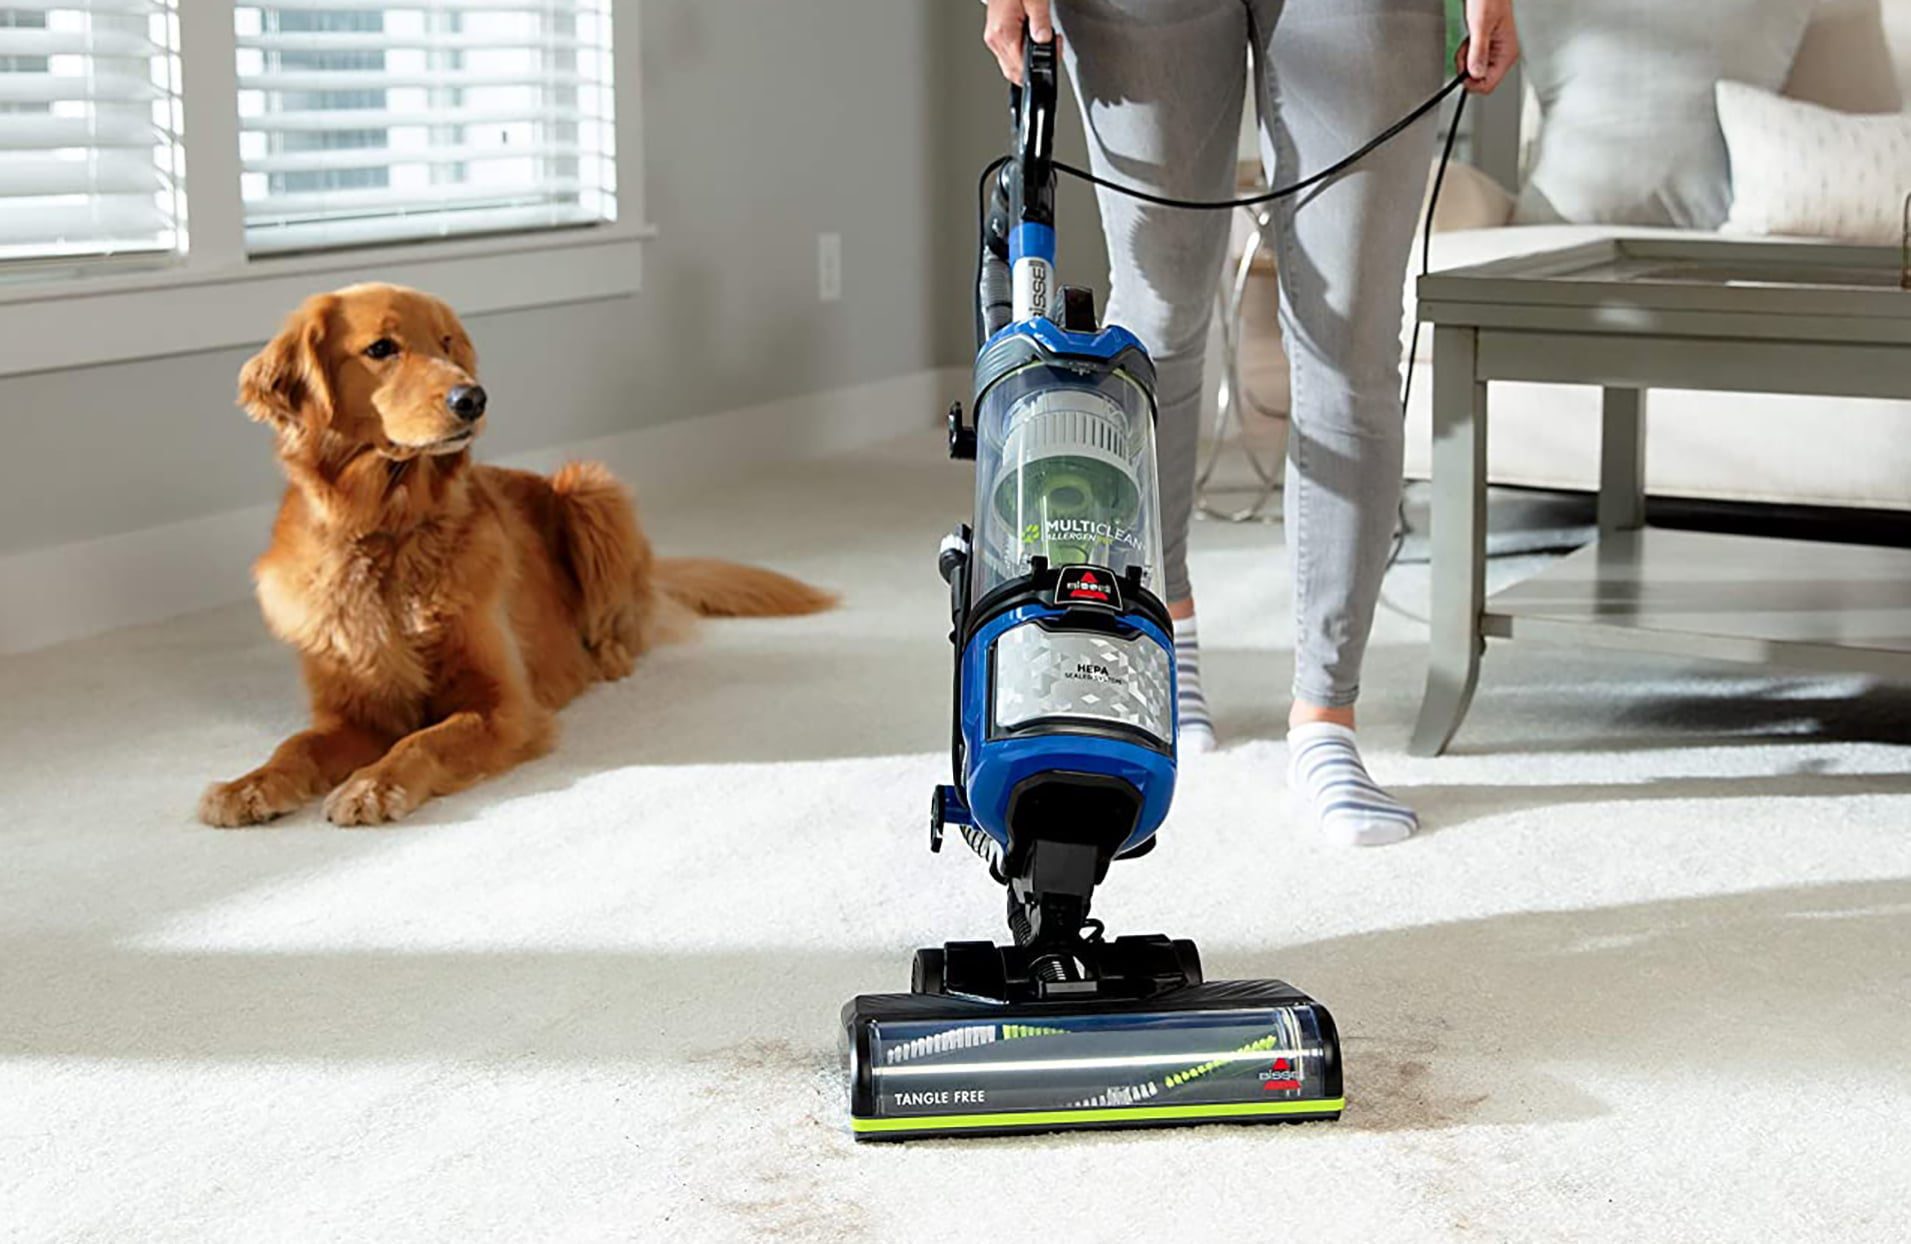 Featured image for “Why House Cleaning Service Should Be Pet-Friendly”